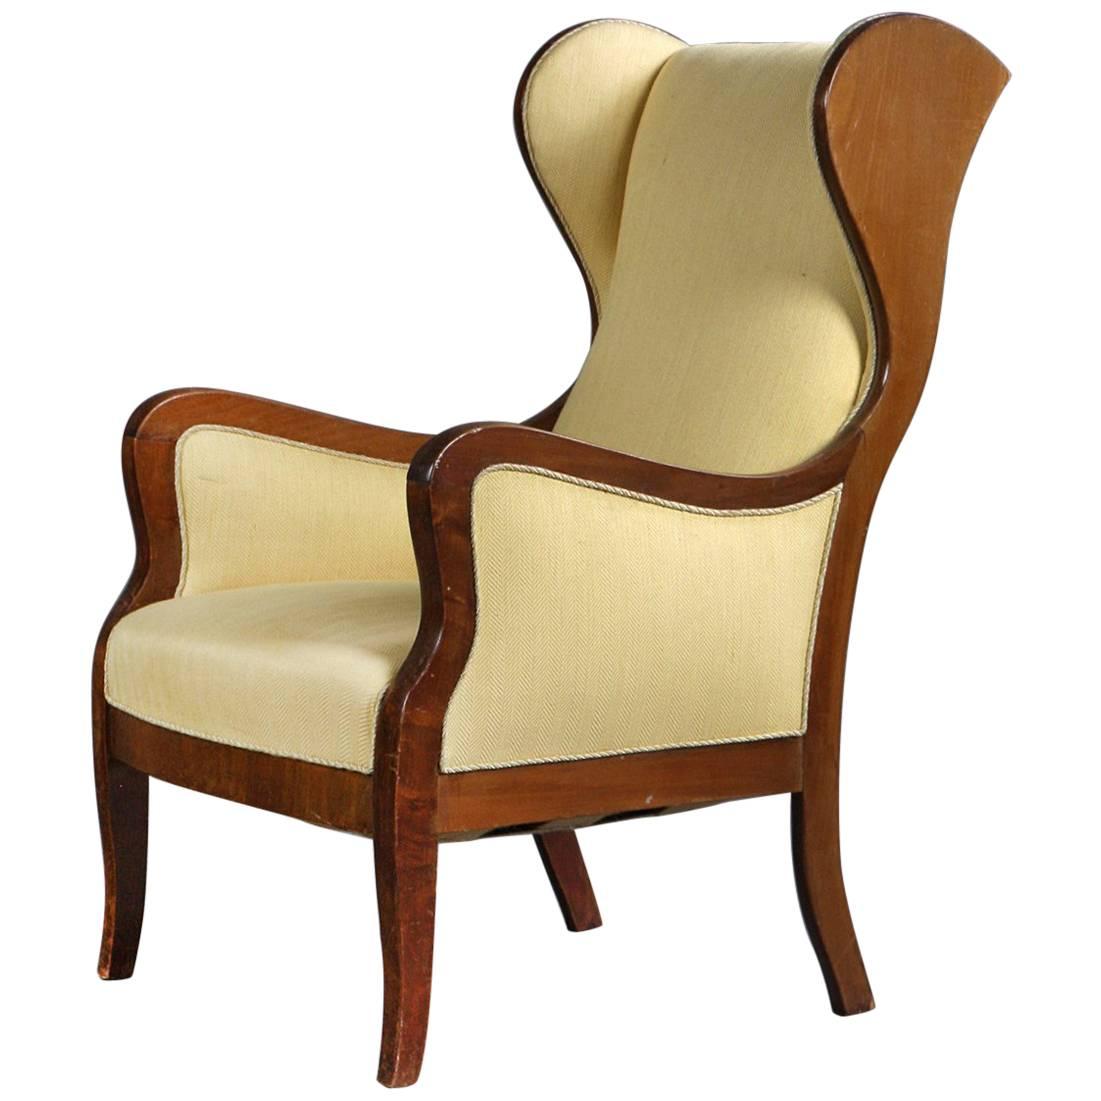 Frits Henningsen Wingback Chair in Mahogany and Wool, Denmark 1940s